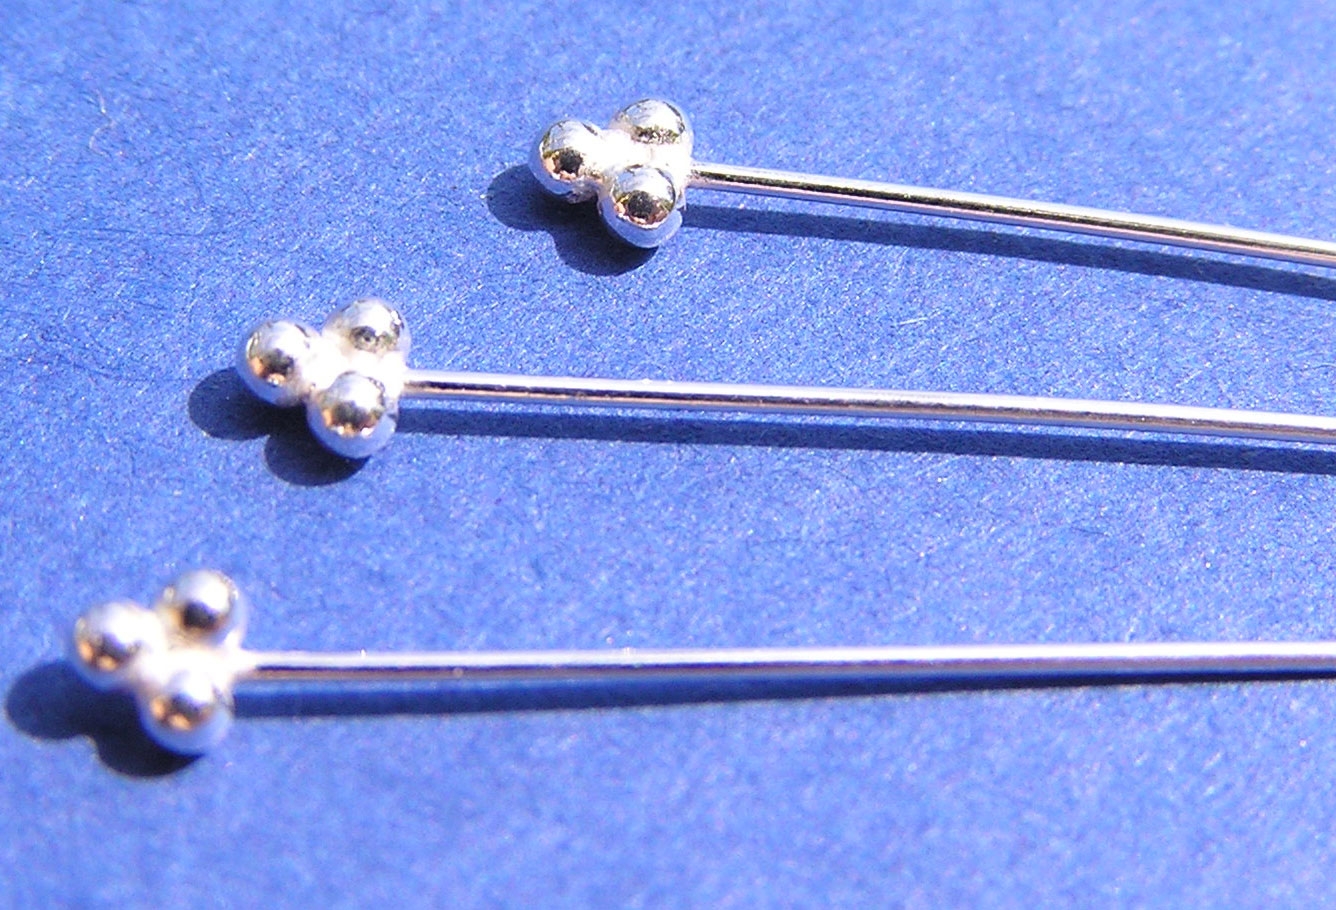  sterling silver 24 gauge (approx 0.5mm thick) triple ball end 40mm headpin 